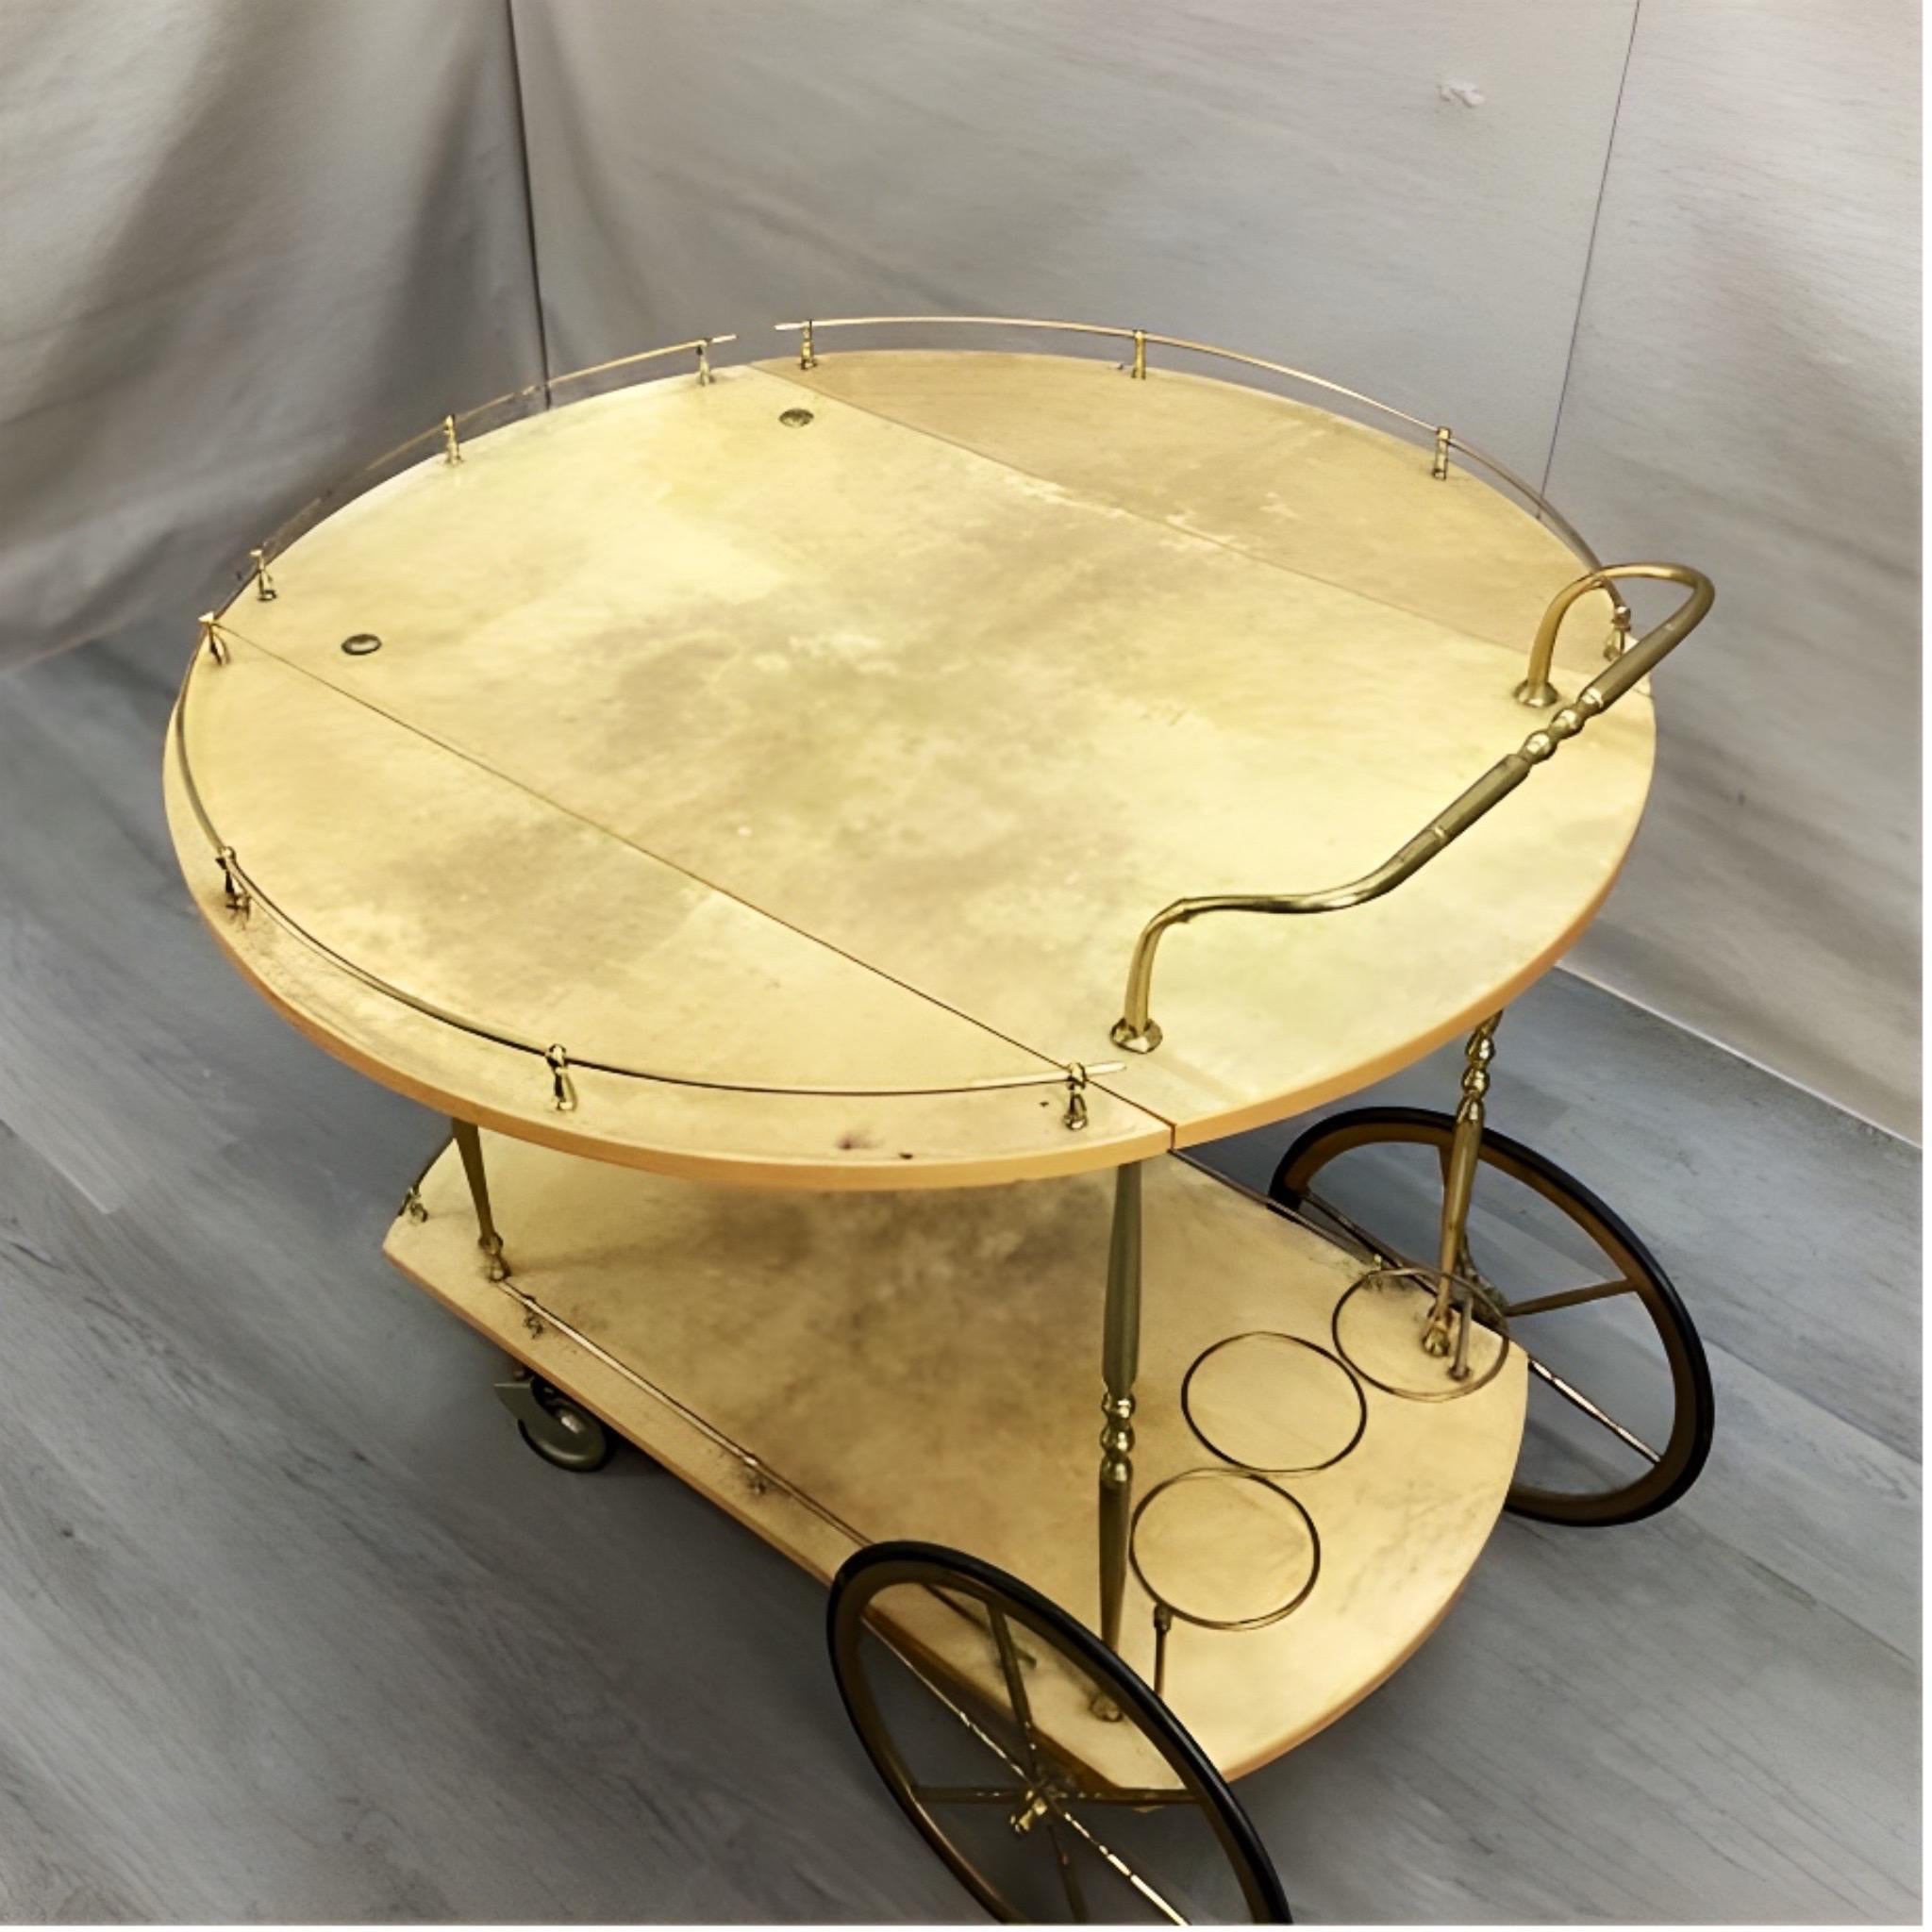 Beautiful 1950s bar cart by Italian artist-craftsman Aldo Tura, featuring the designers distinct use of brass and lacquered goatskin that Tura was well-known for. The quality of Aldo Tura's craftsmanship can be attributed to the fact that his work